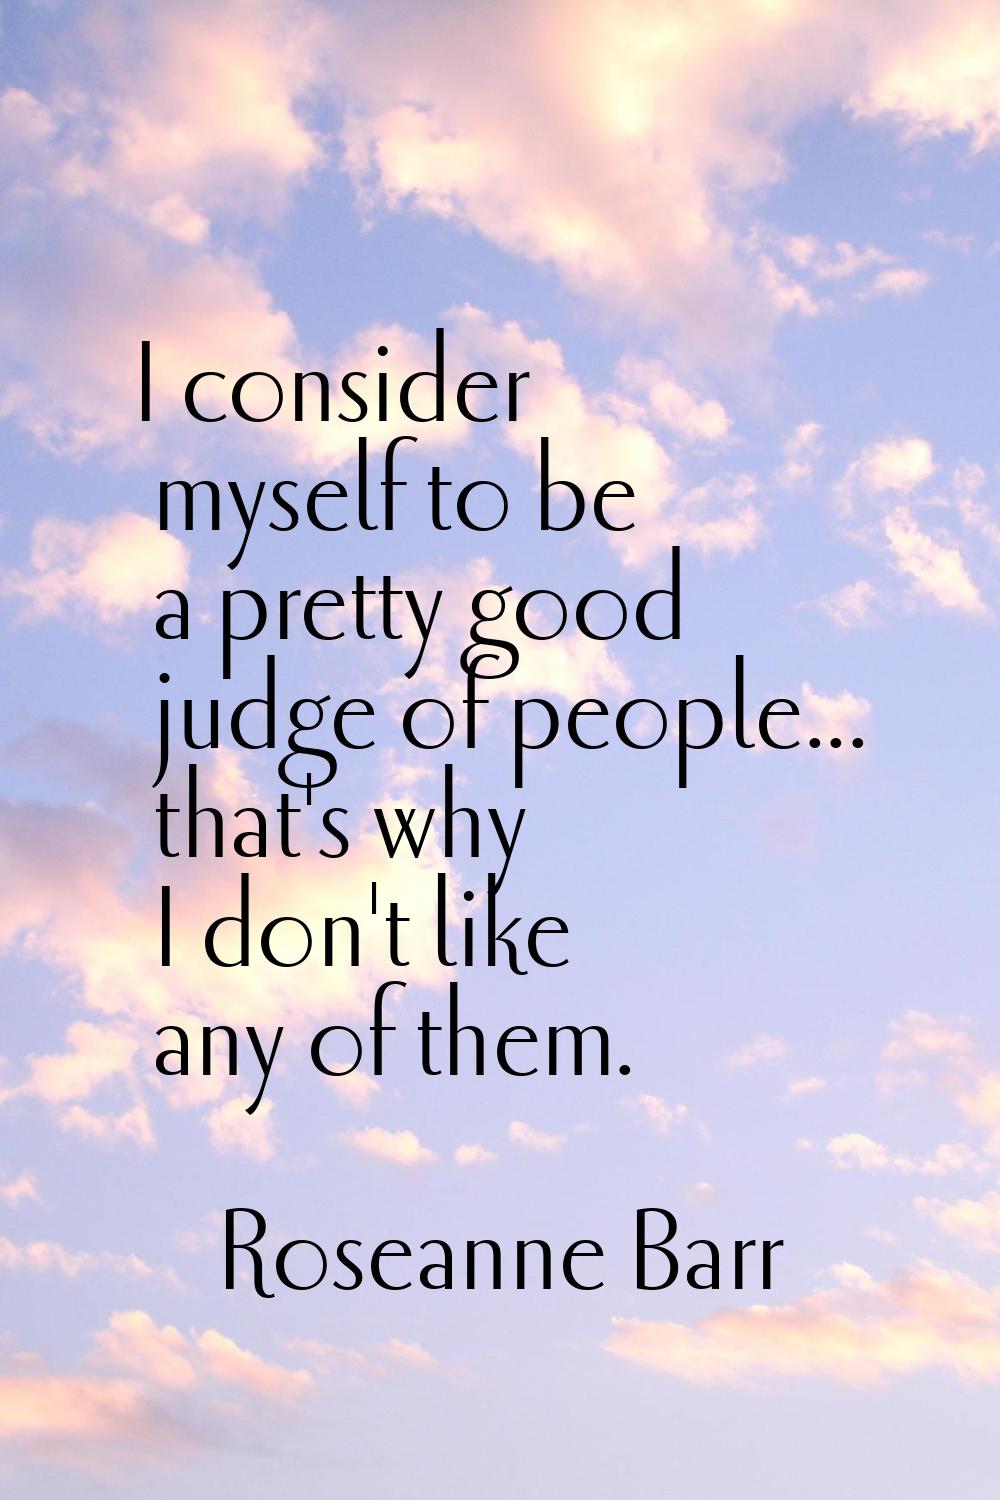 I consider myself to be a pretty good judge of people... that's why I don't like any of them.